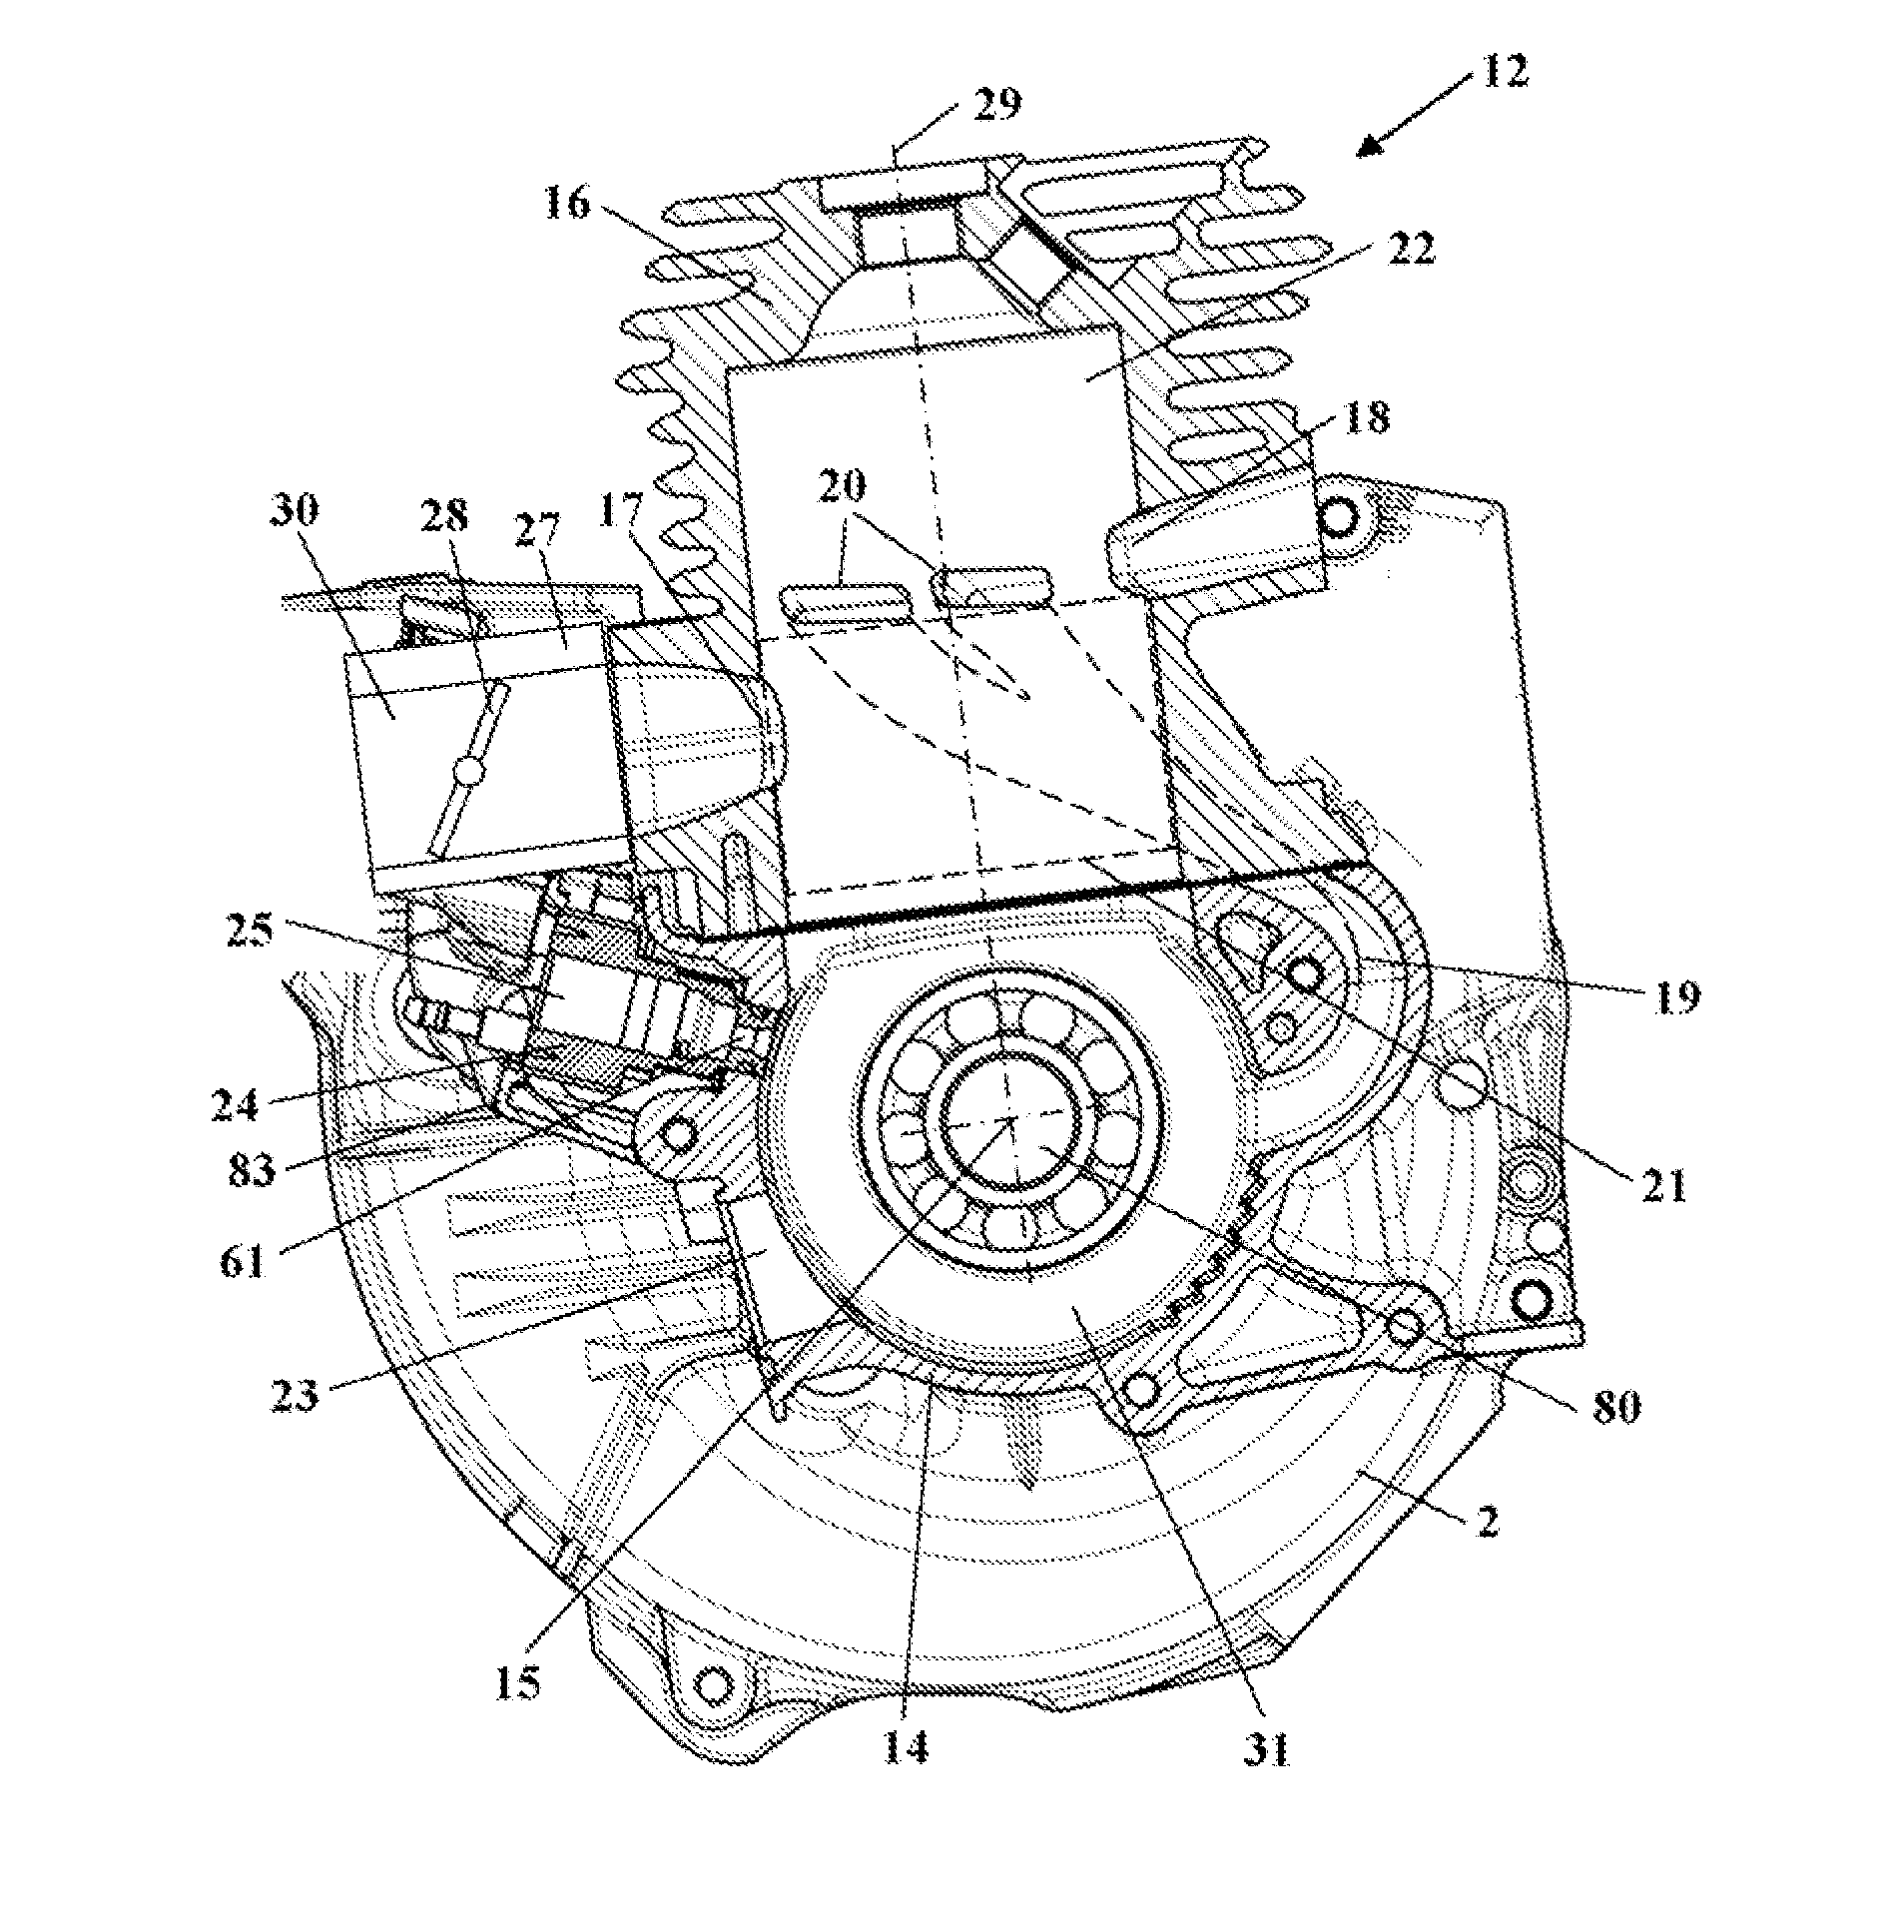 Internal combustion engine with fuel system